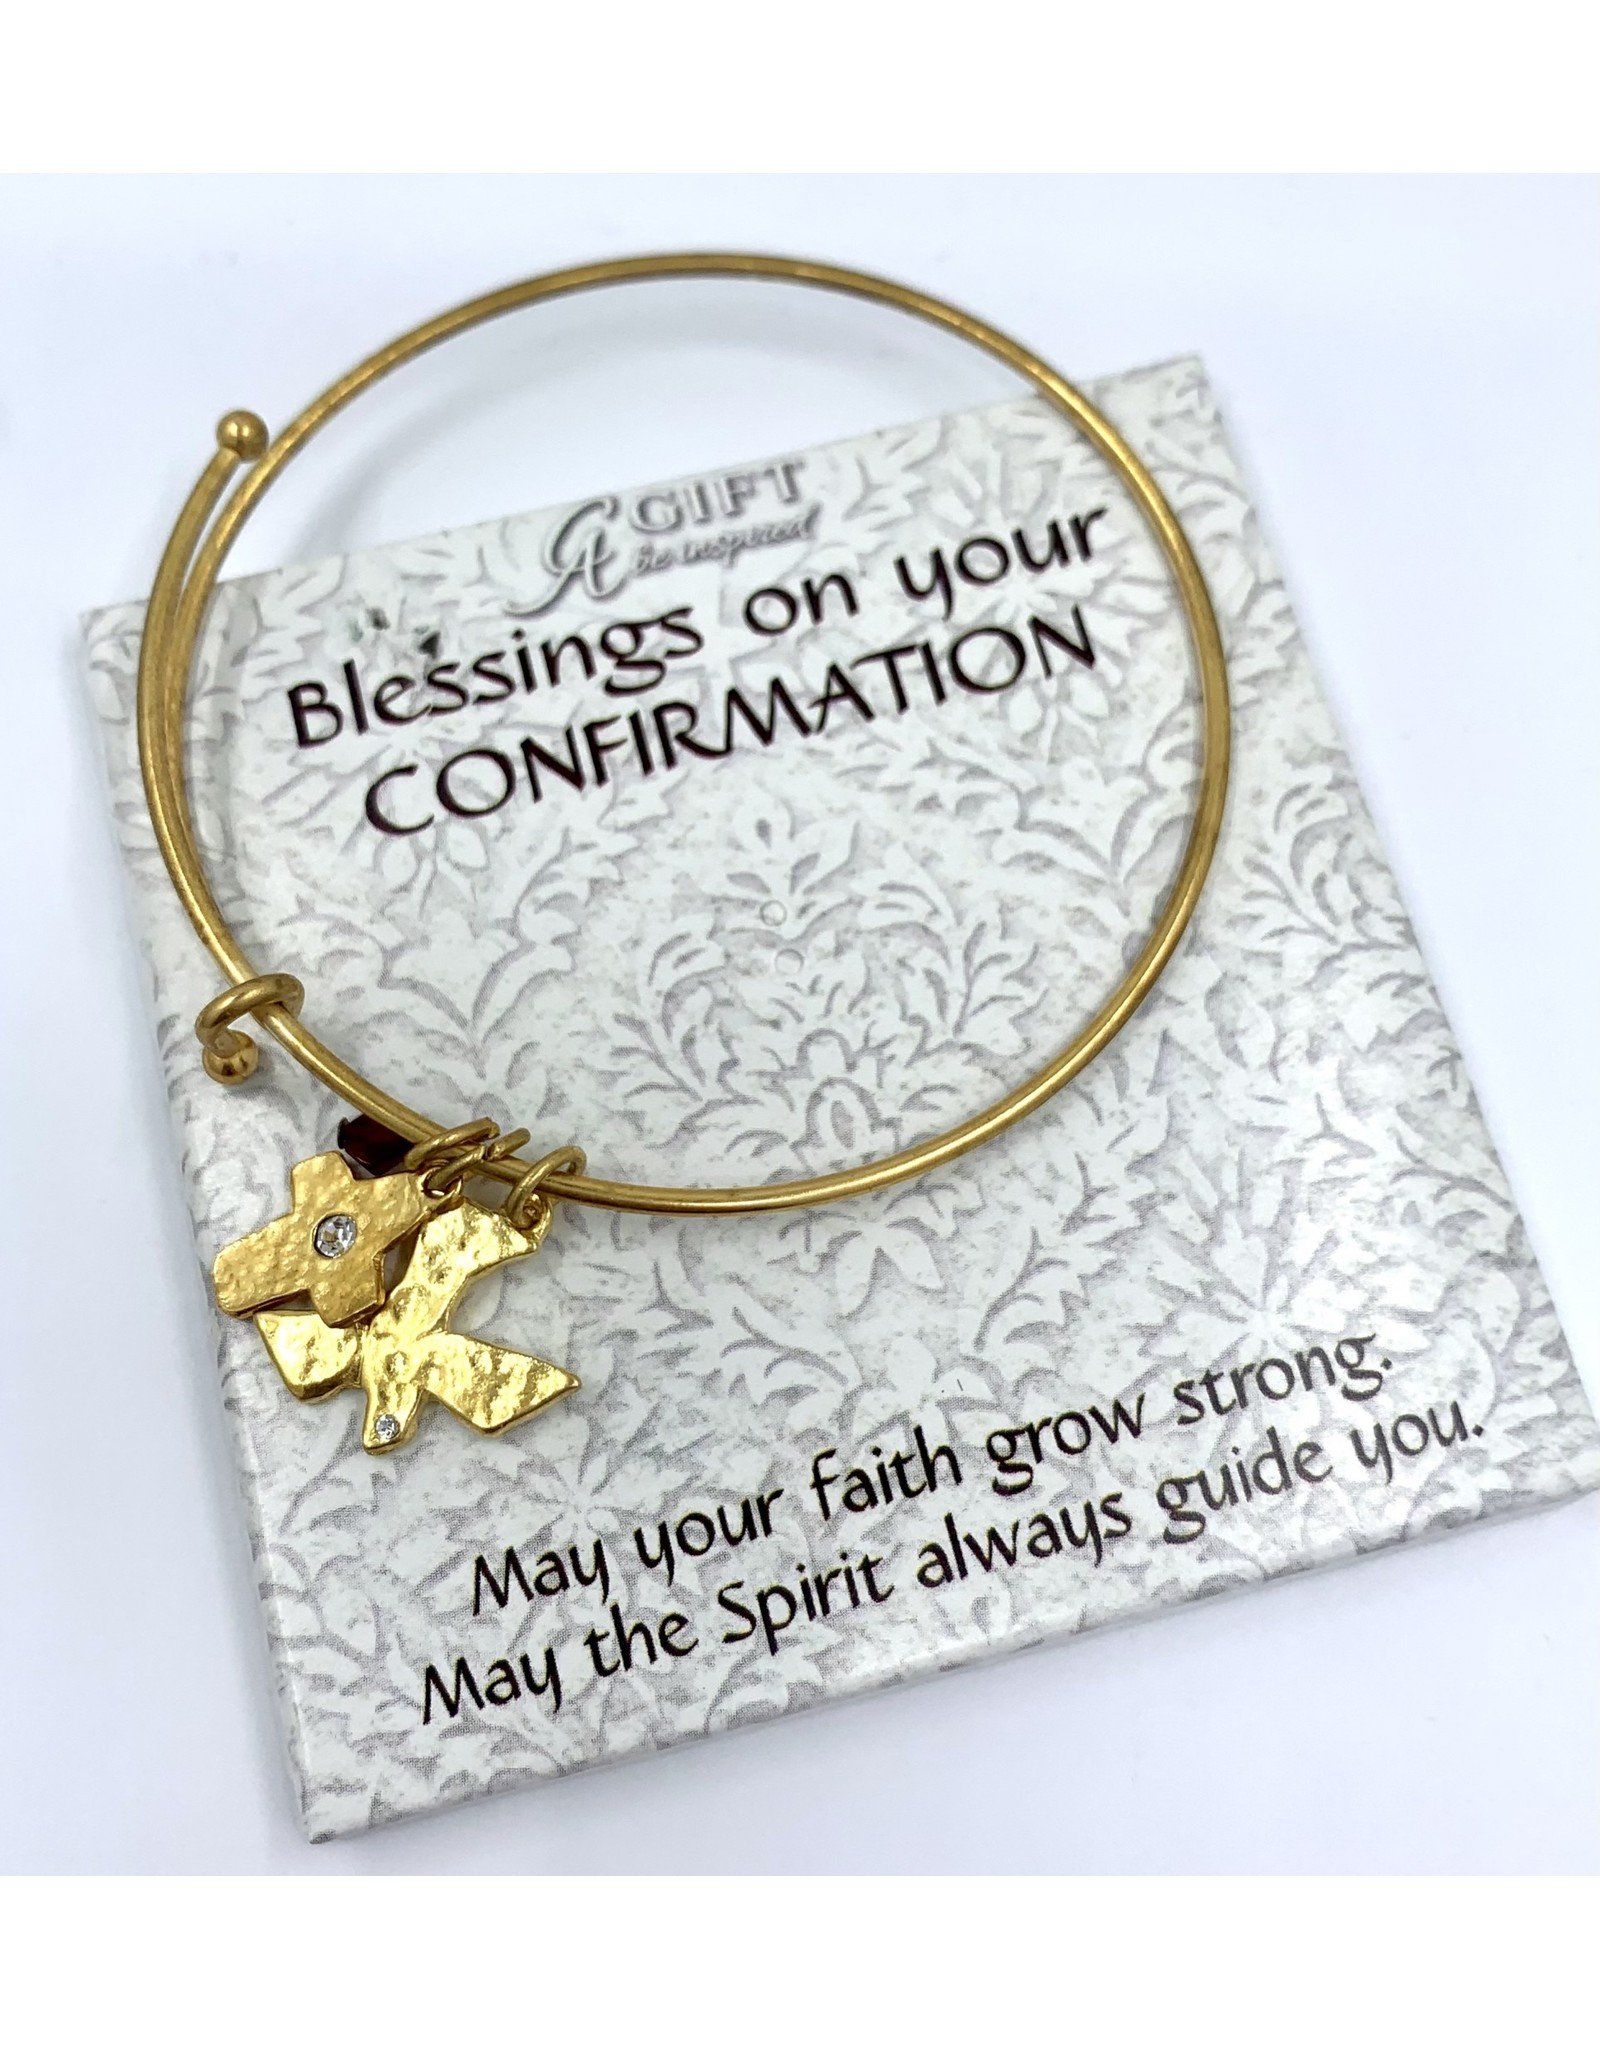 Confirmation Bracelet - Gold Bangle with Dove, Cross, and Gem